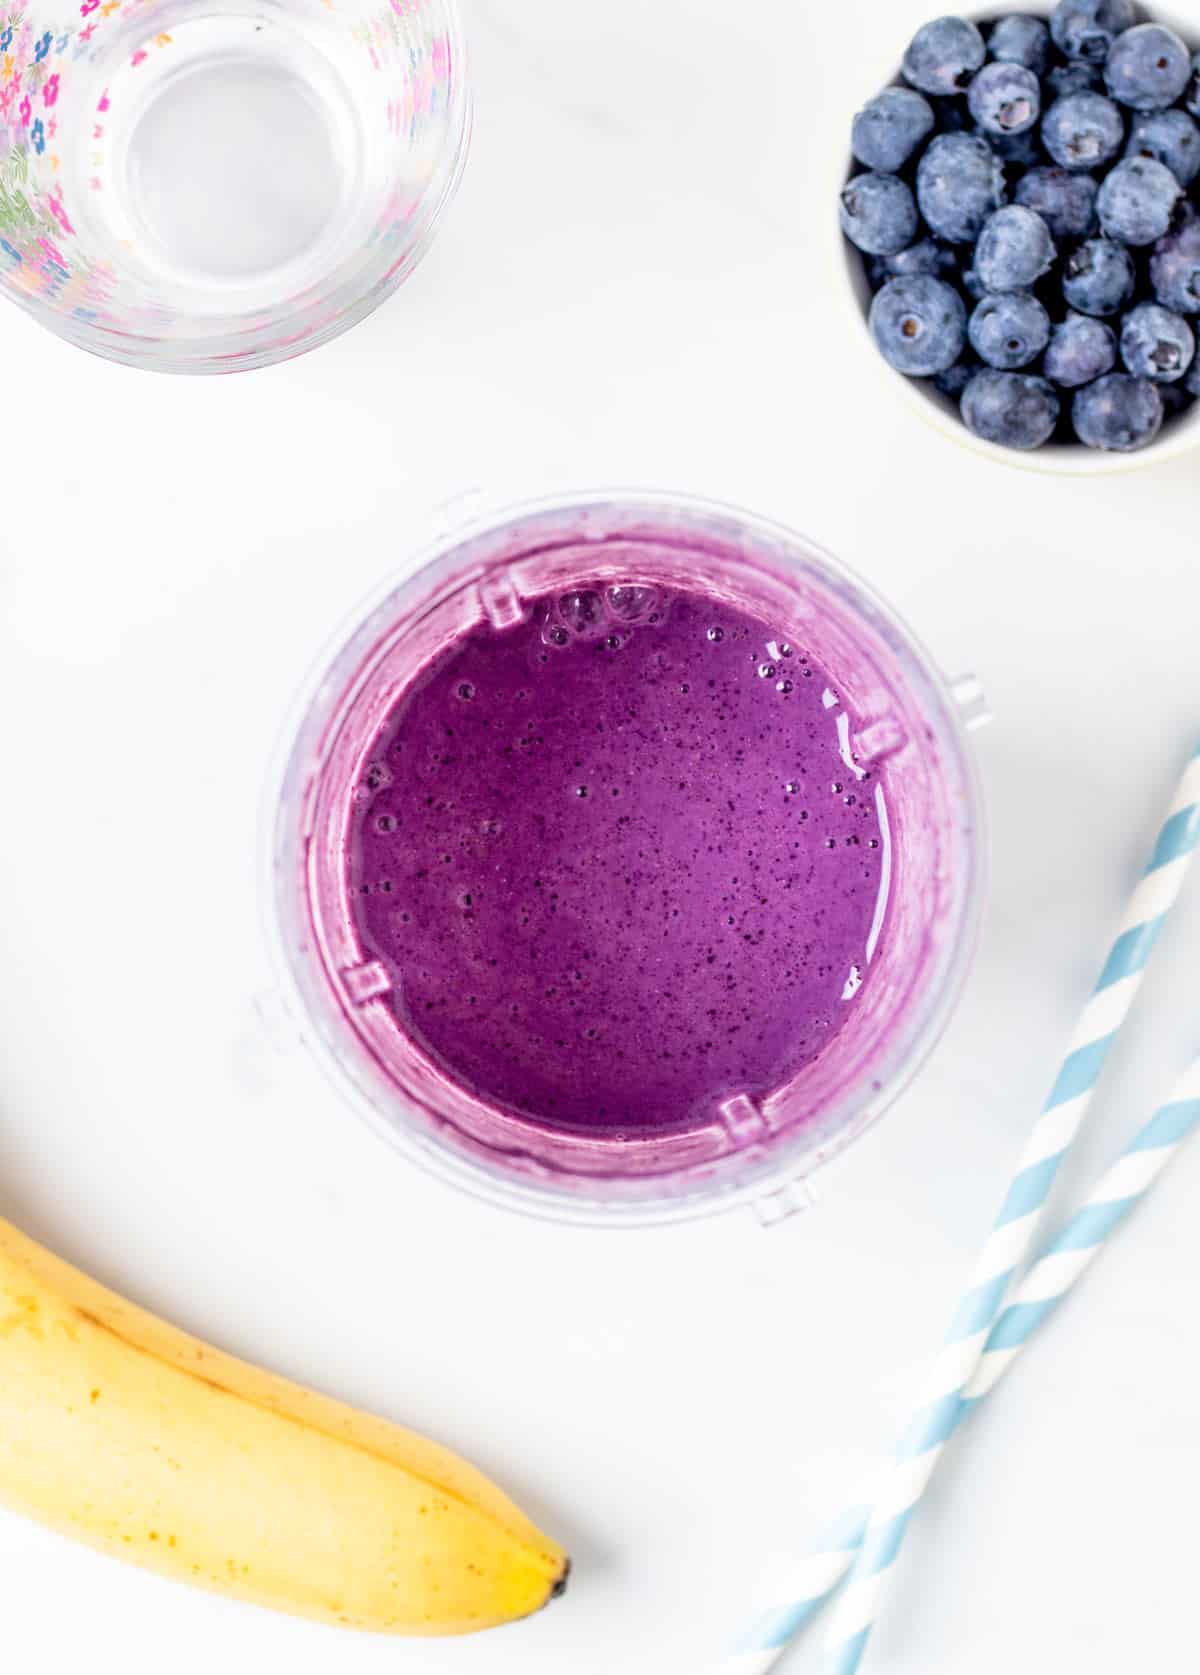 Overhead shot of a fruit smoothie in a Ninja blender cup with blueberries and bananas.